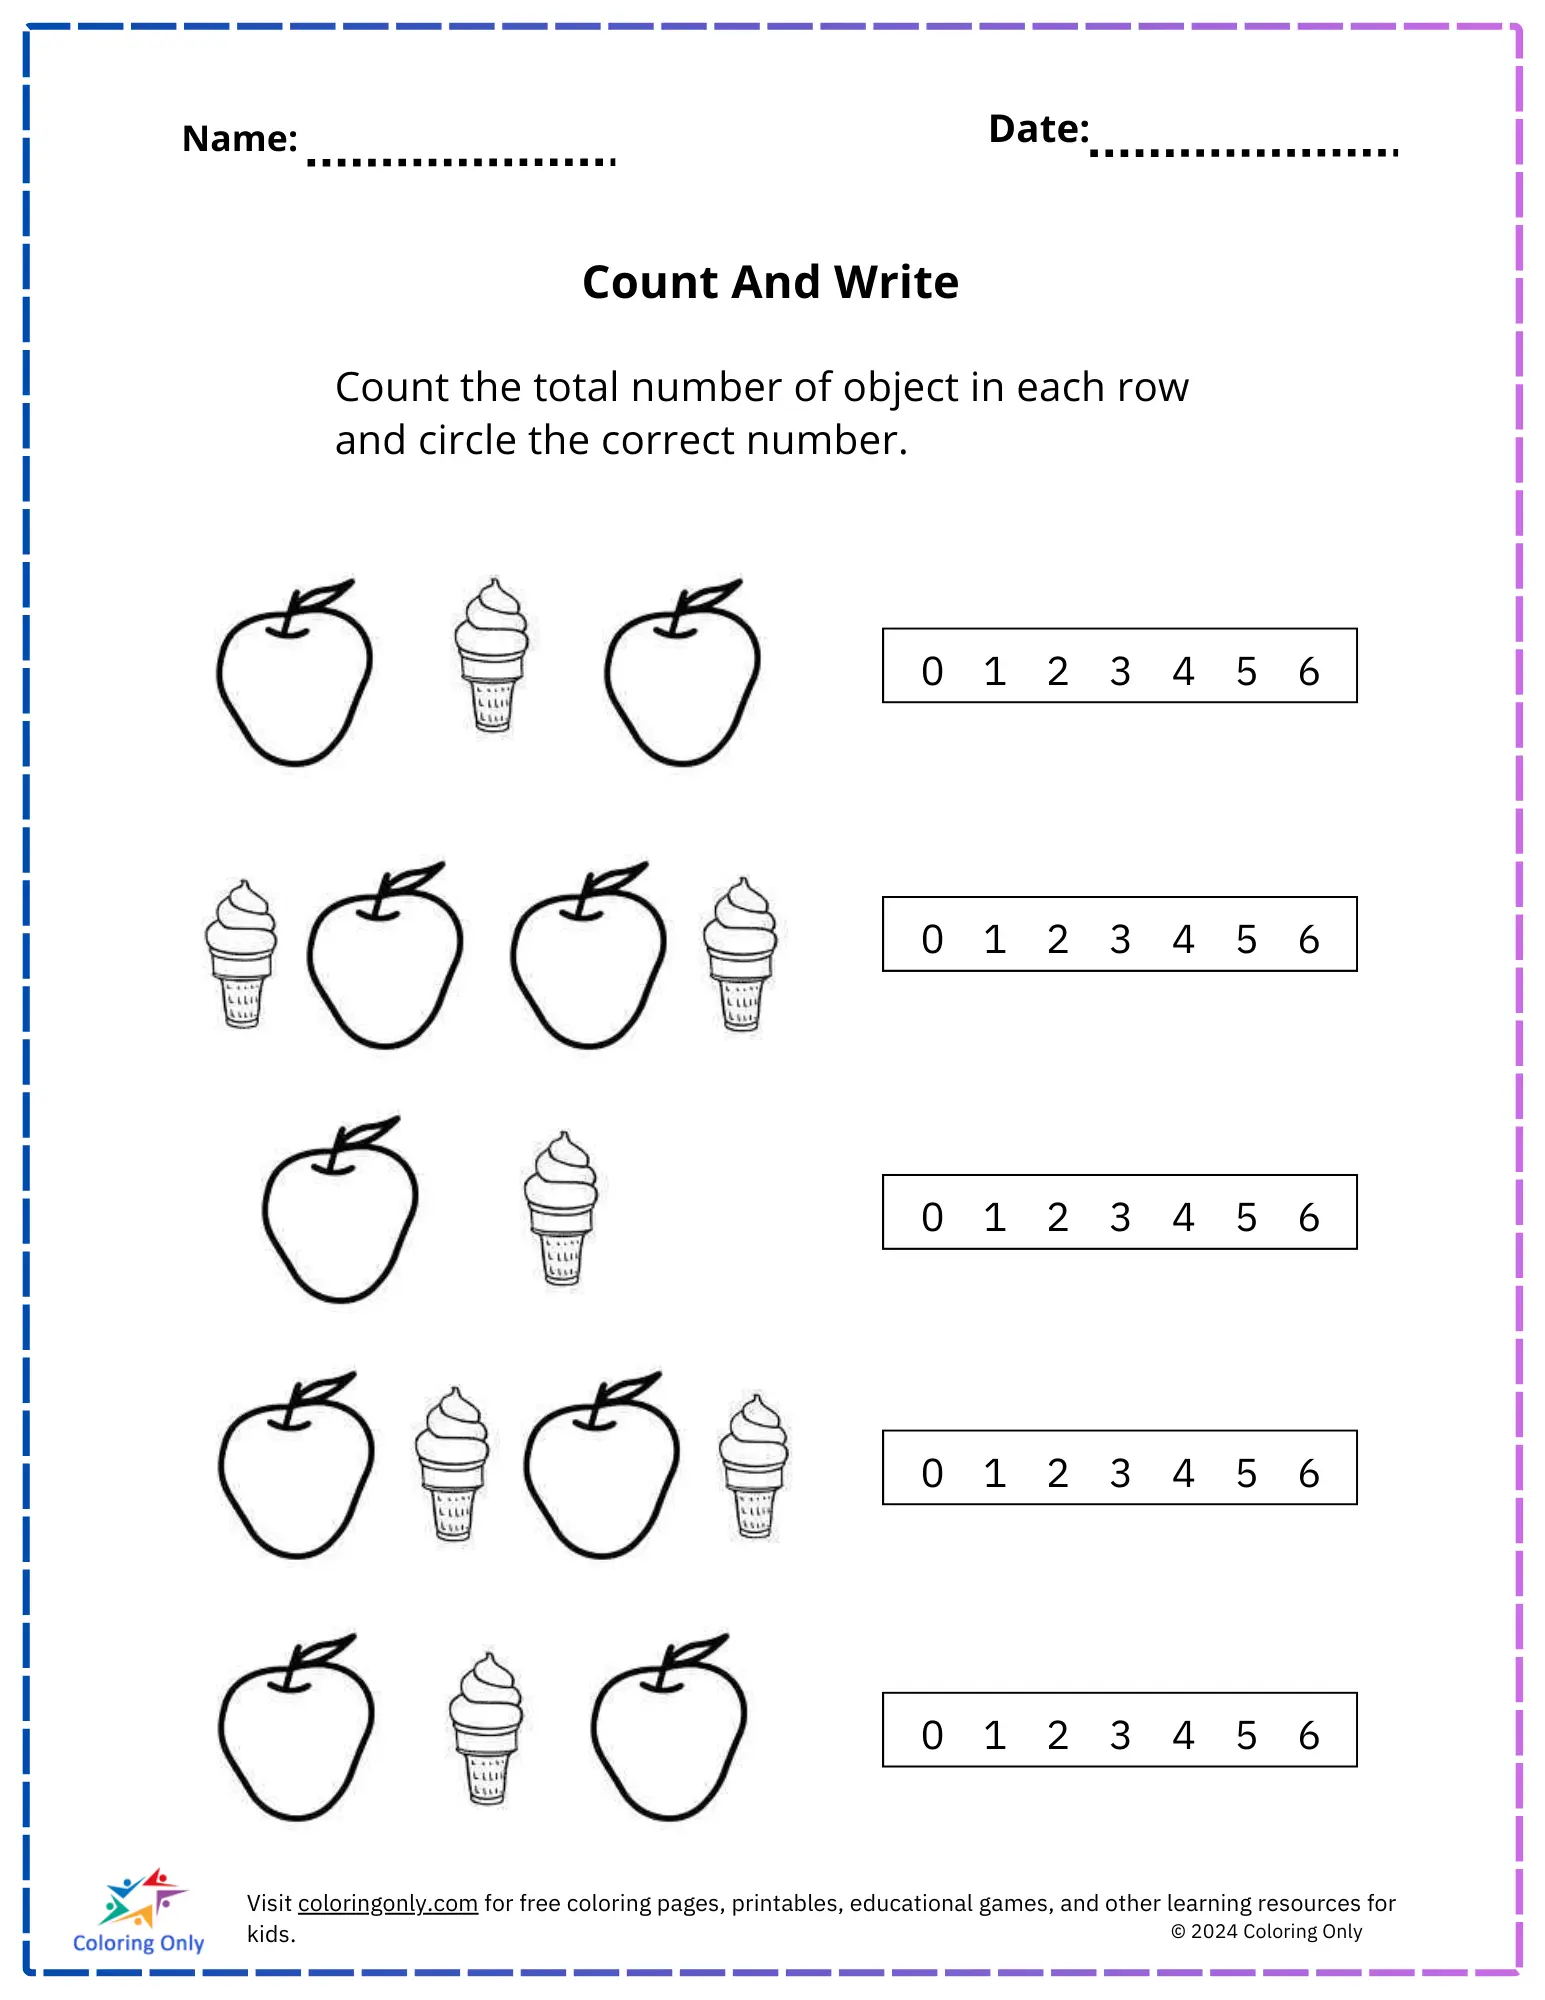 Count And Write Free Printable Worksheet